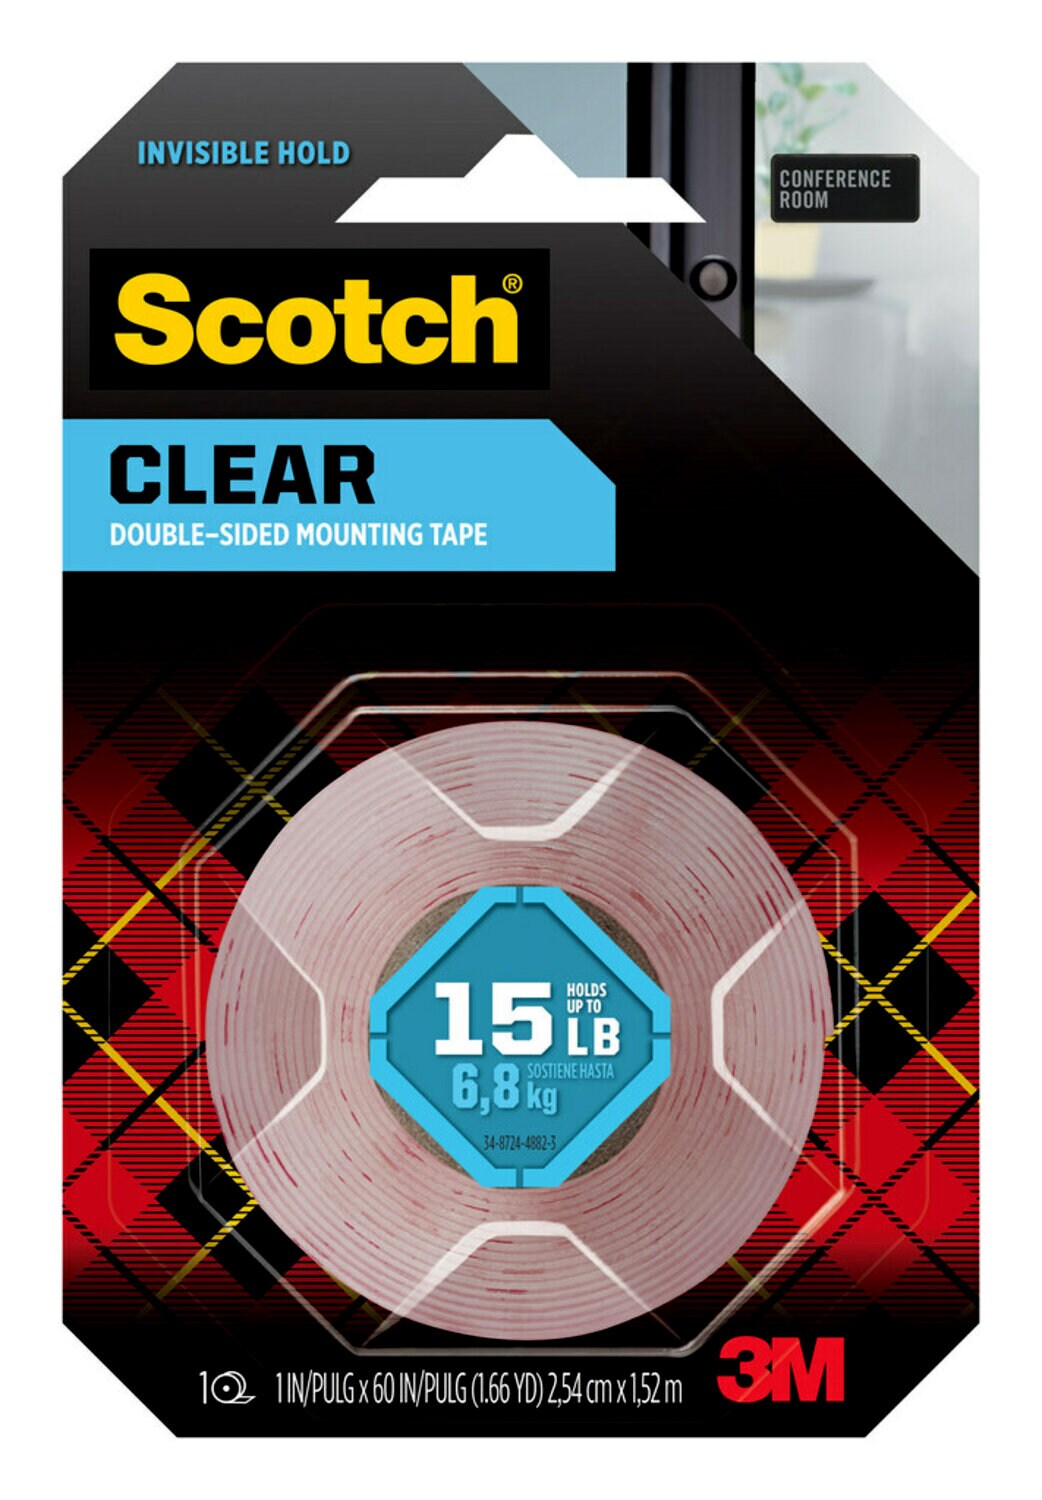 7100254953 - Scotch Clear Double-Sided Mounting Tape 410S, 1 in x 60 in (2.54 cm x 1.52 m)